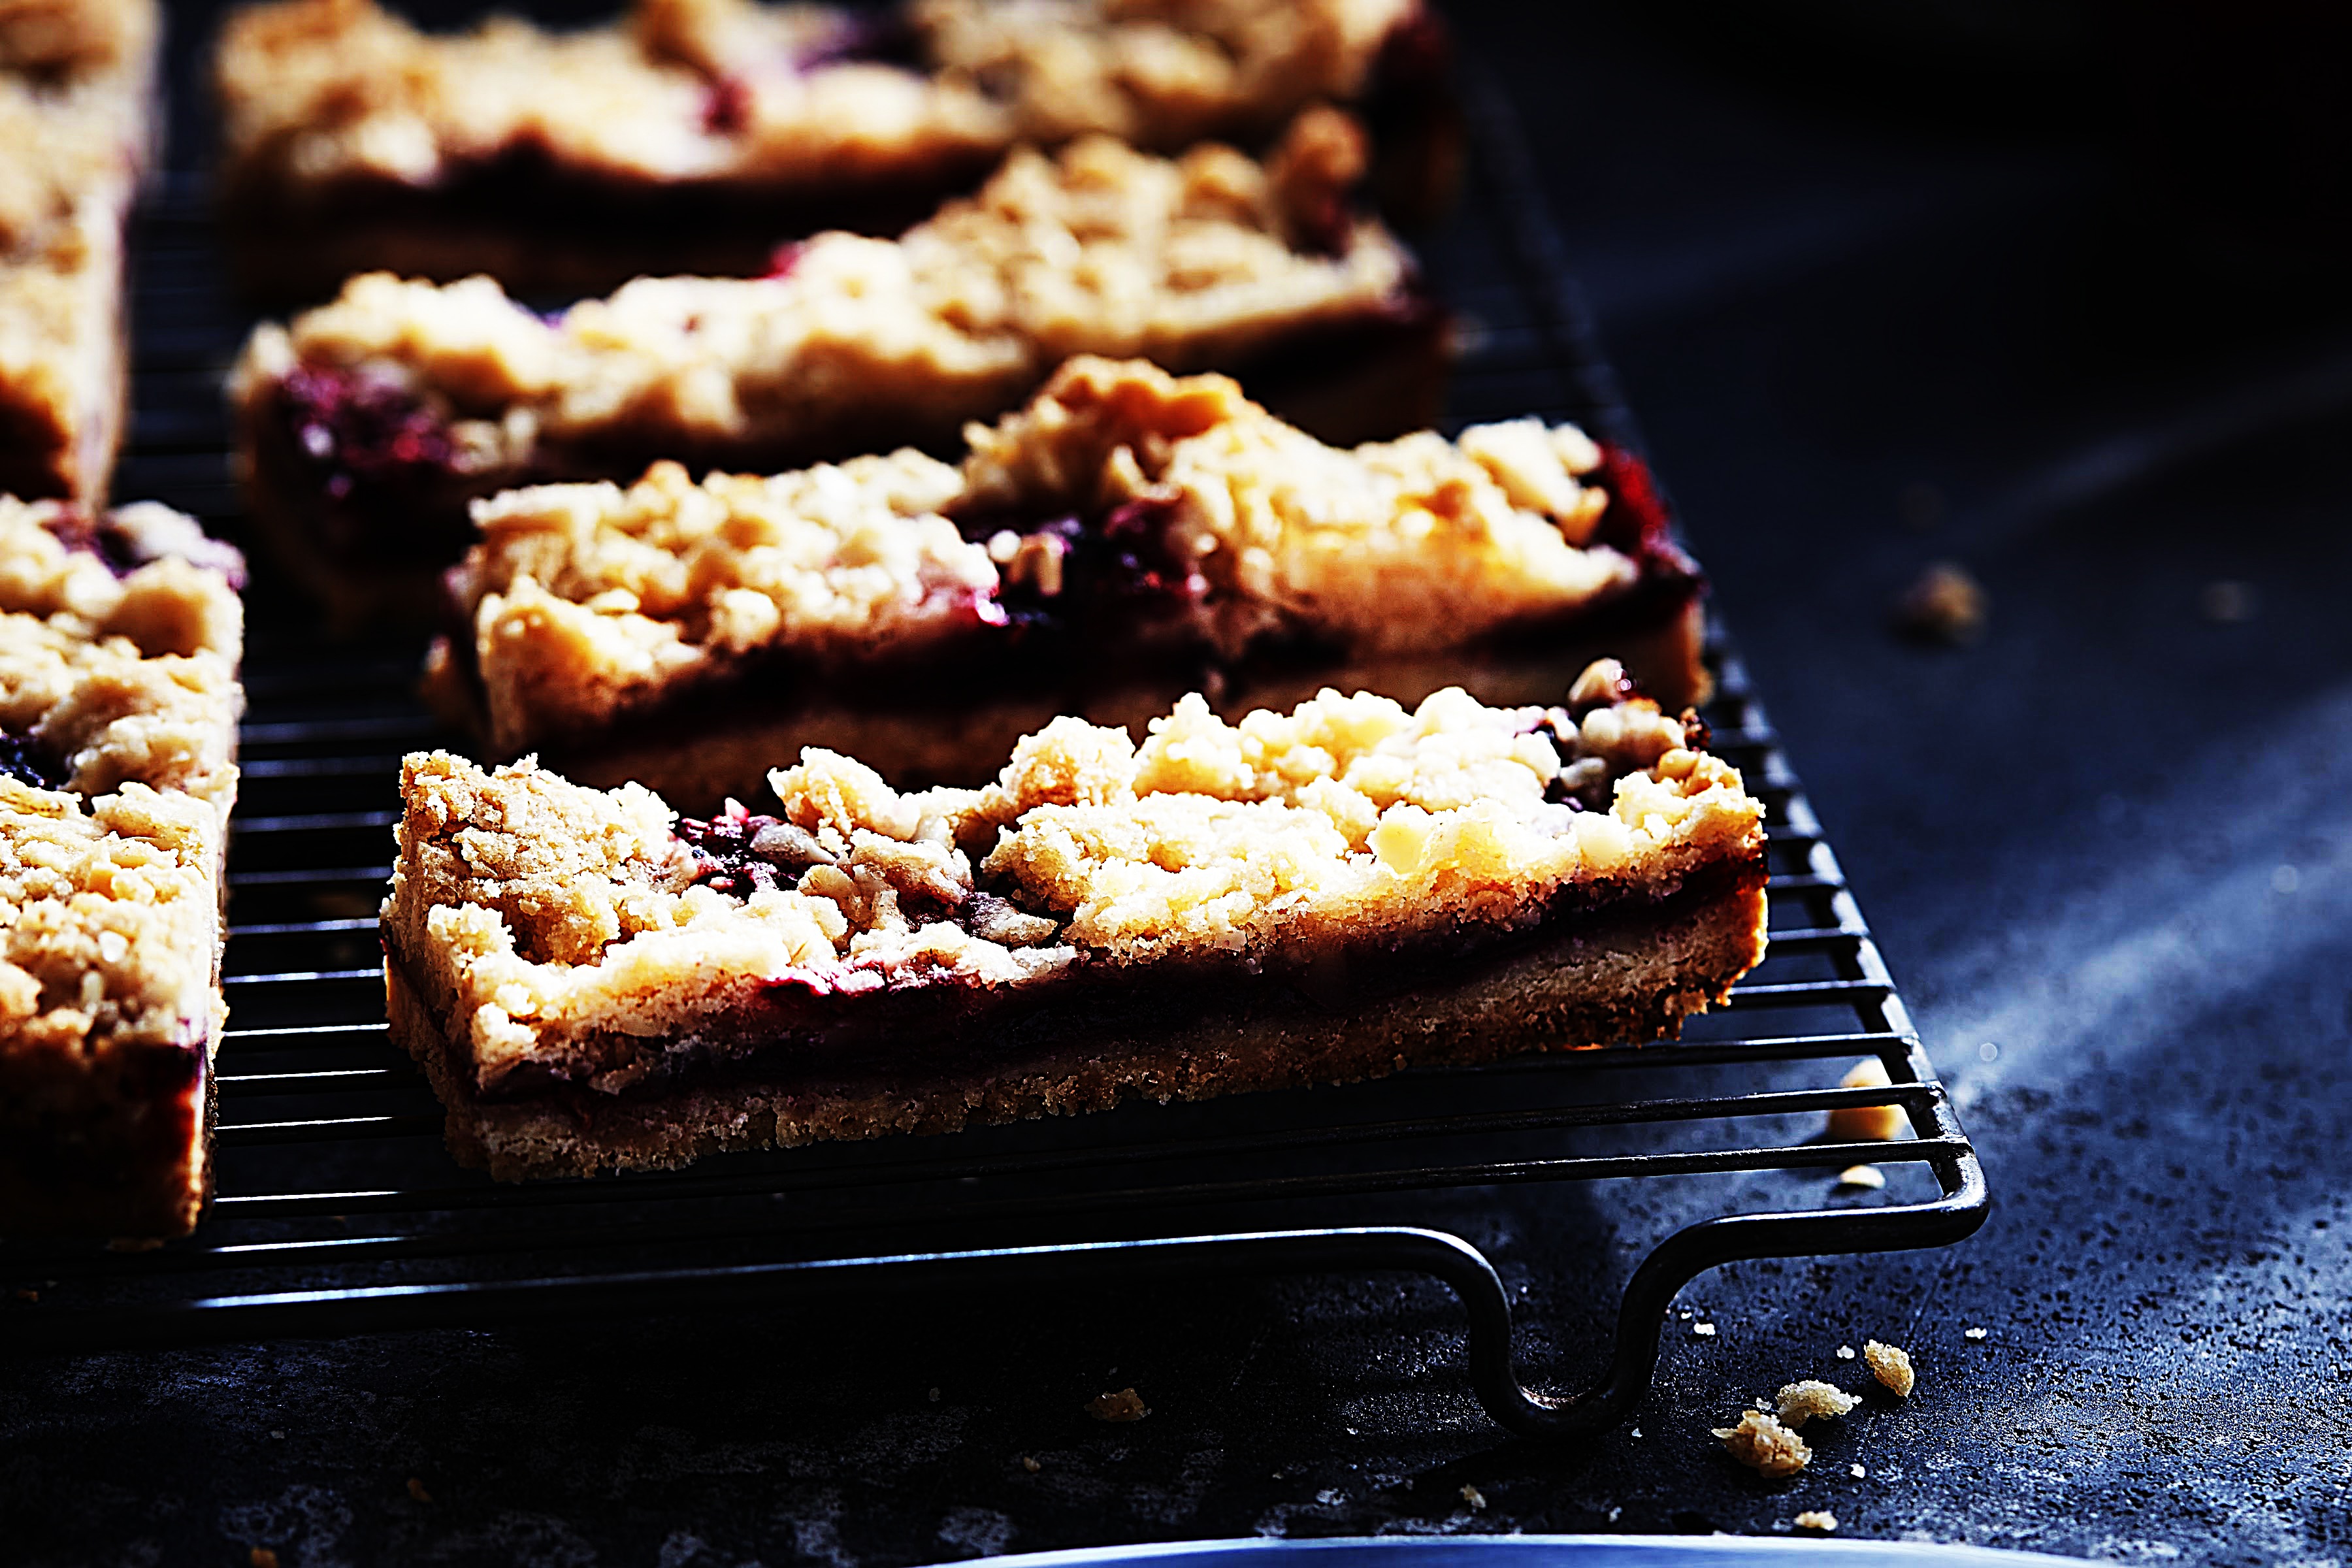 Stupid-Easy Recipe for 3 Berry Crumble Bars (#1 Top-Rated)